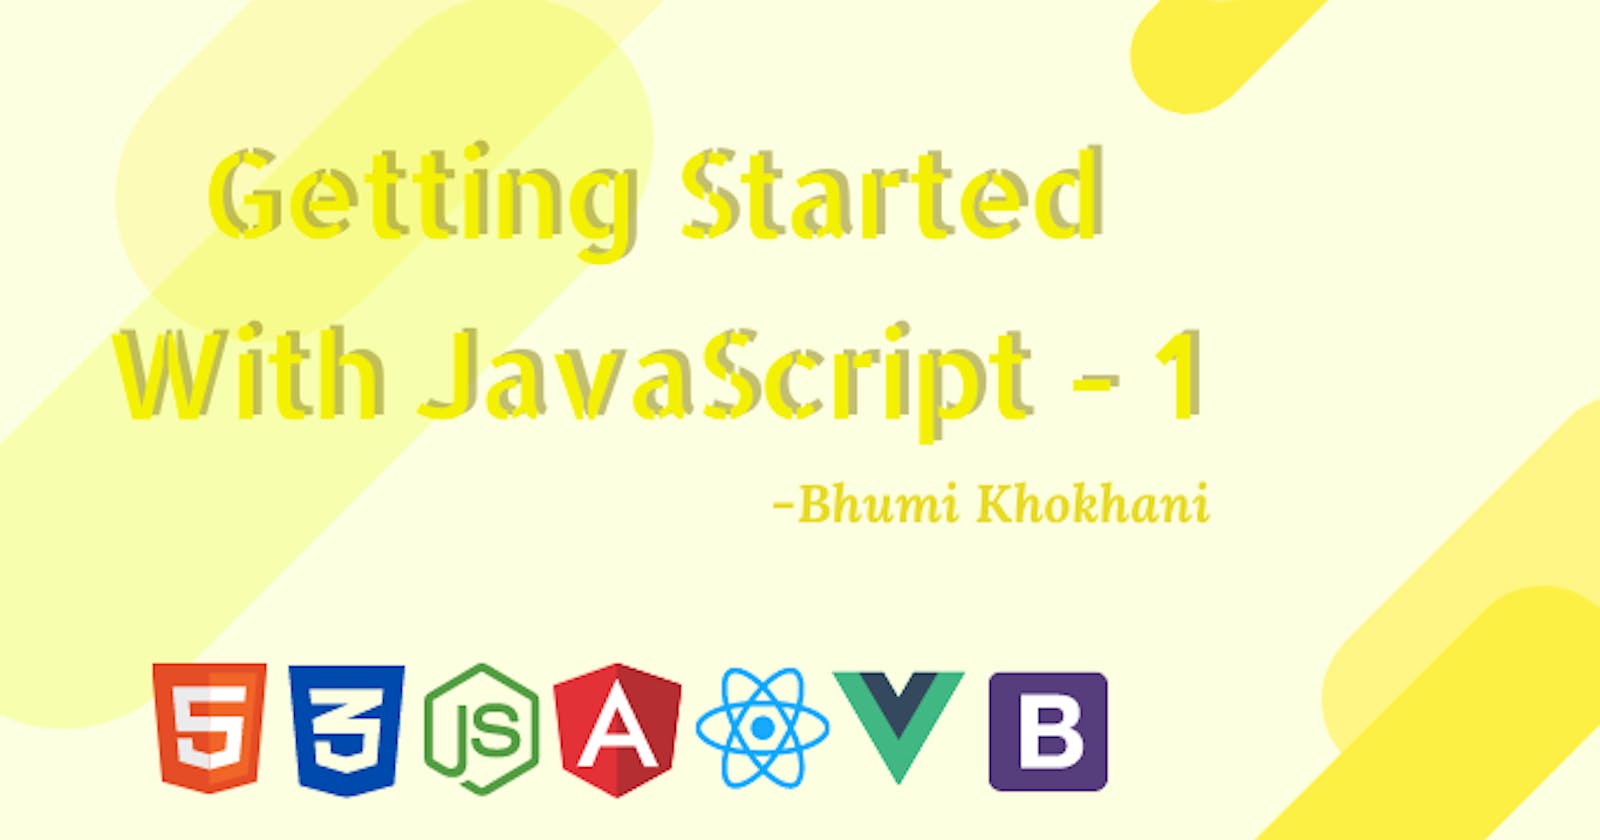 Getting Started with JavaScript - 1